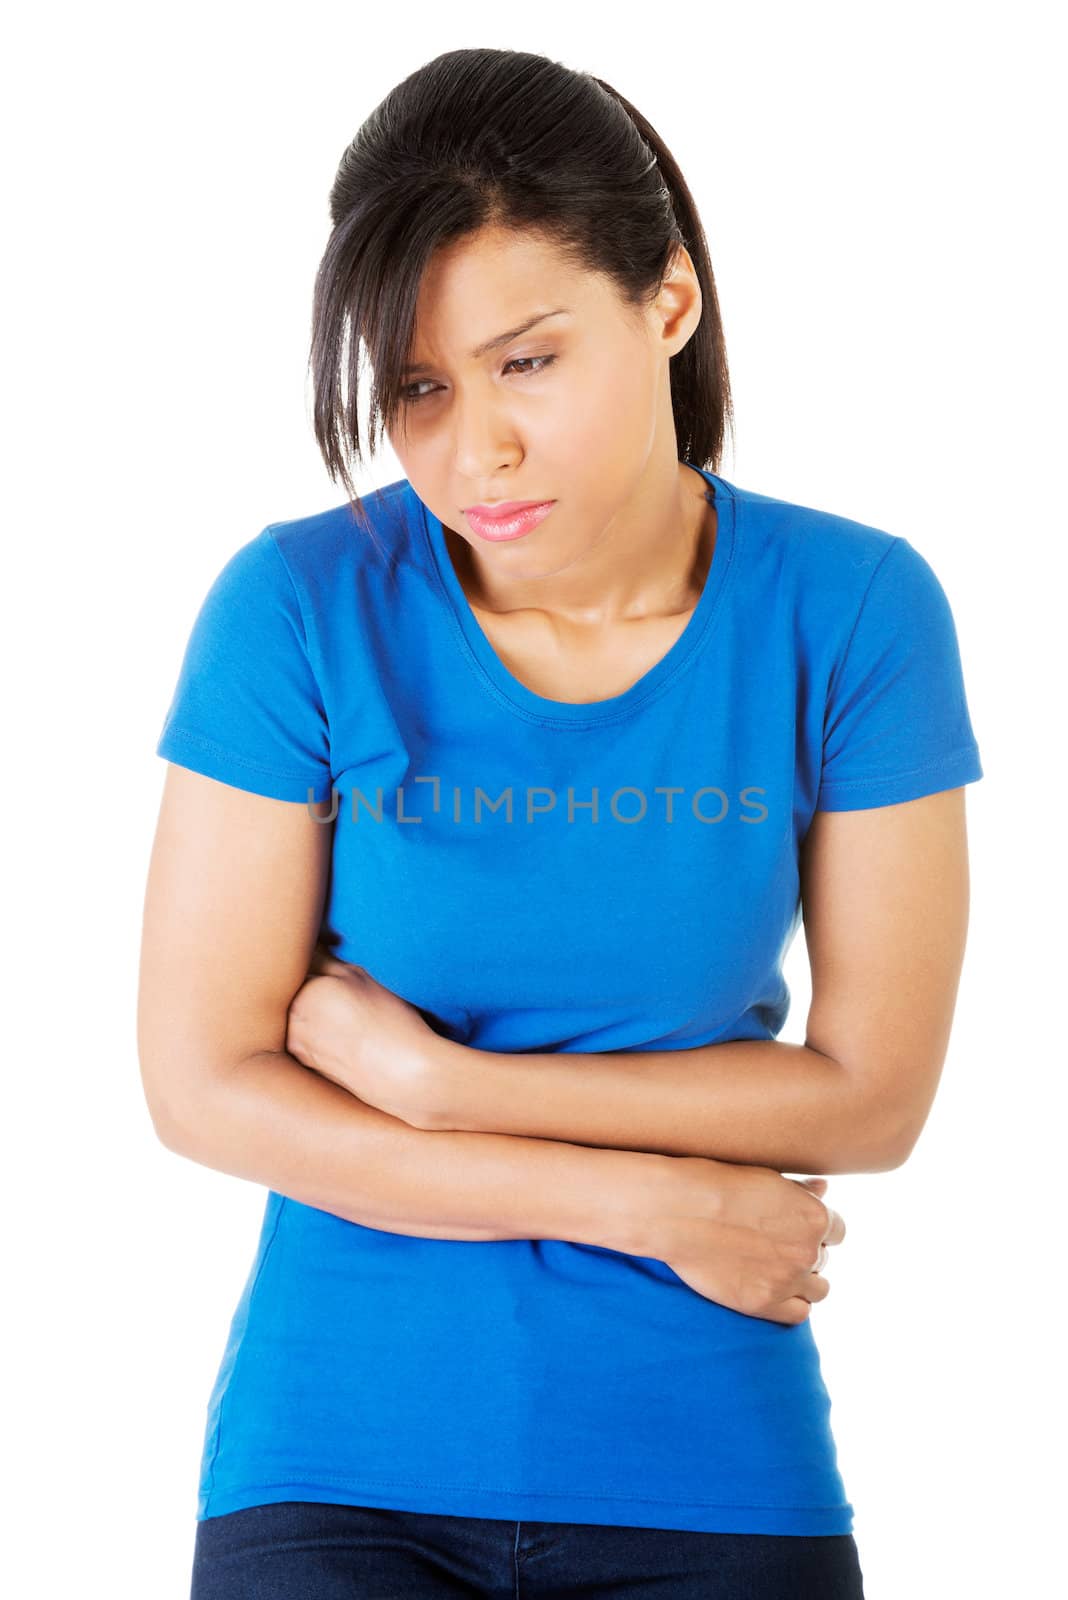 Young woman with stomach issues by BDS